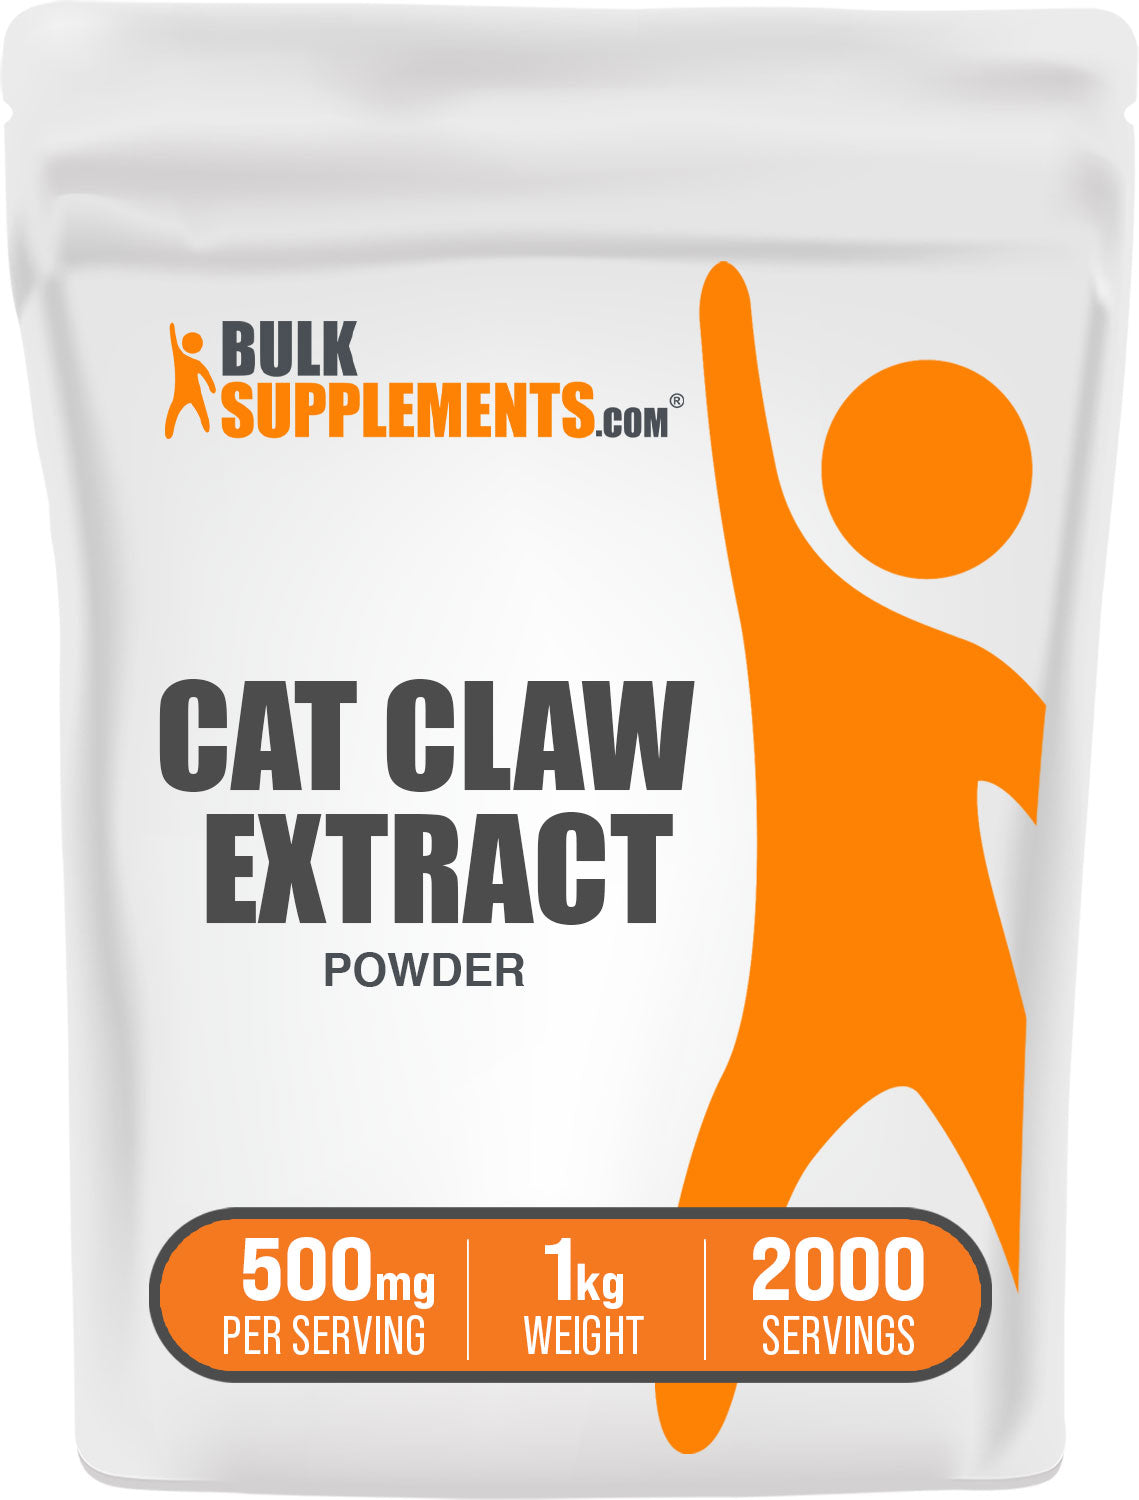 1kg cats claw